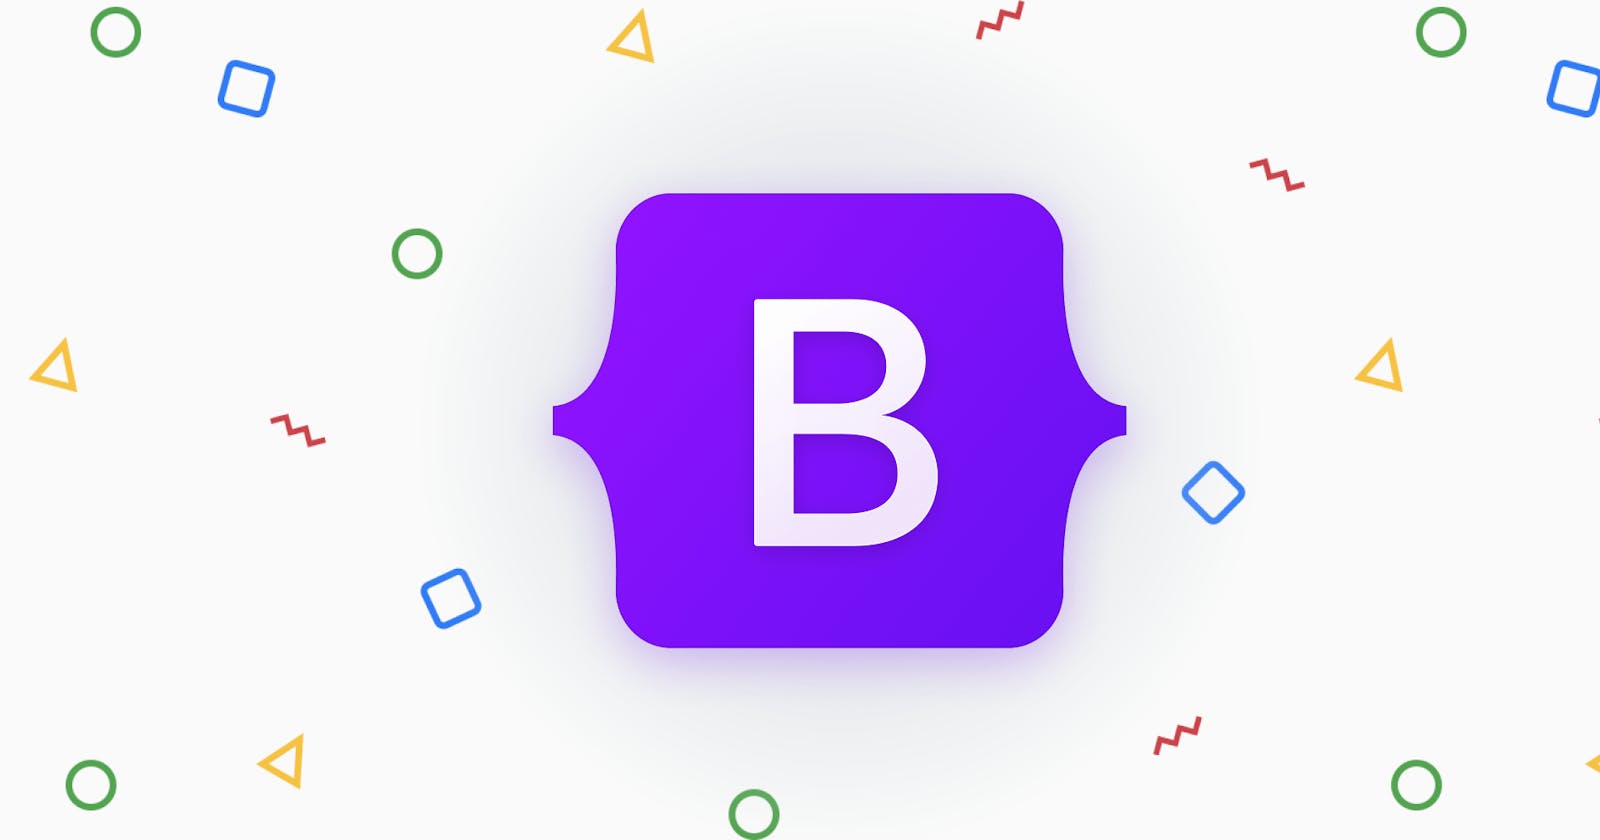 Bootstrap 5 is here - here are new exciting changes.